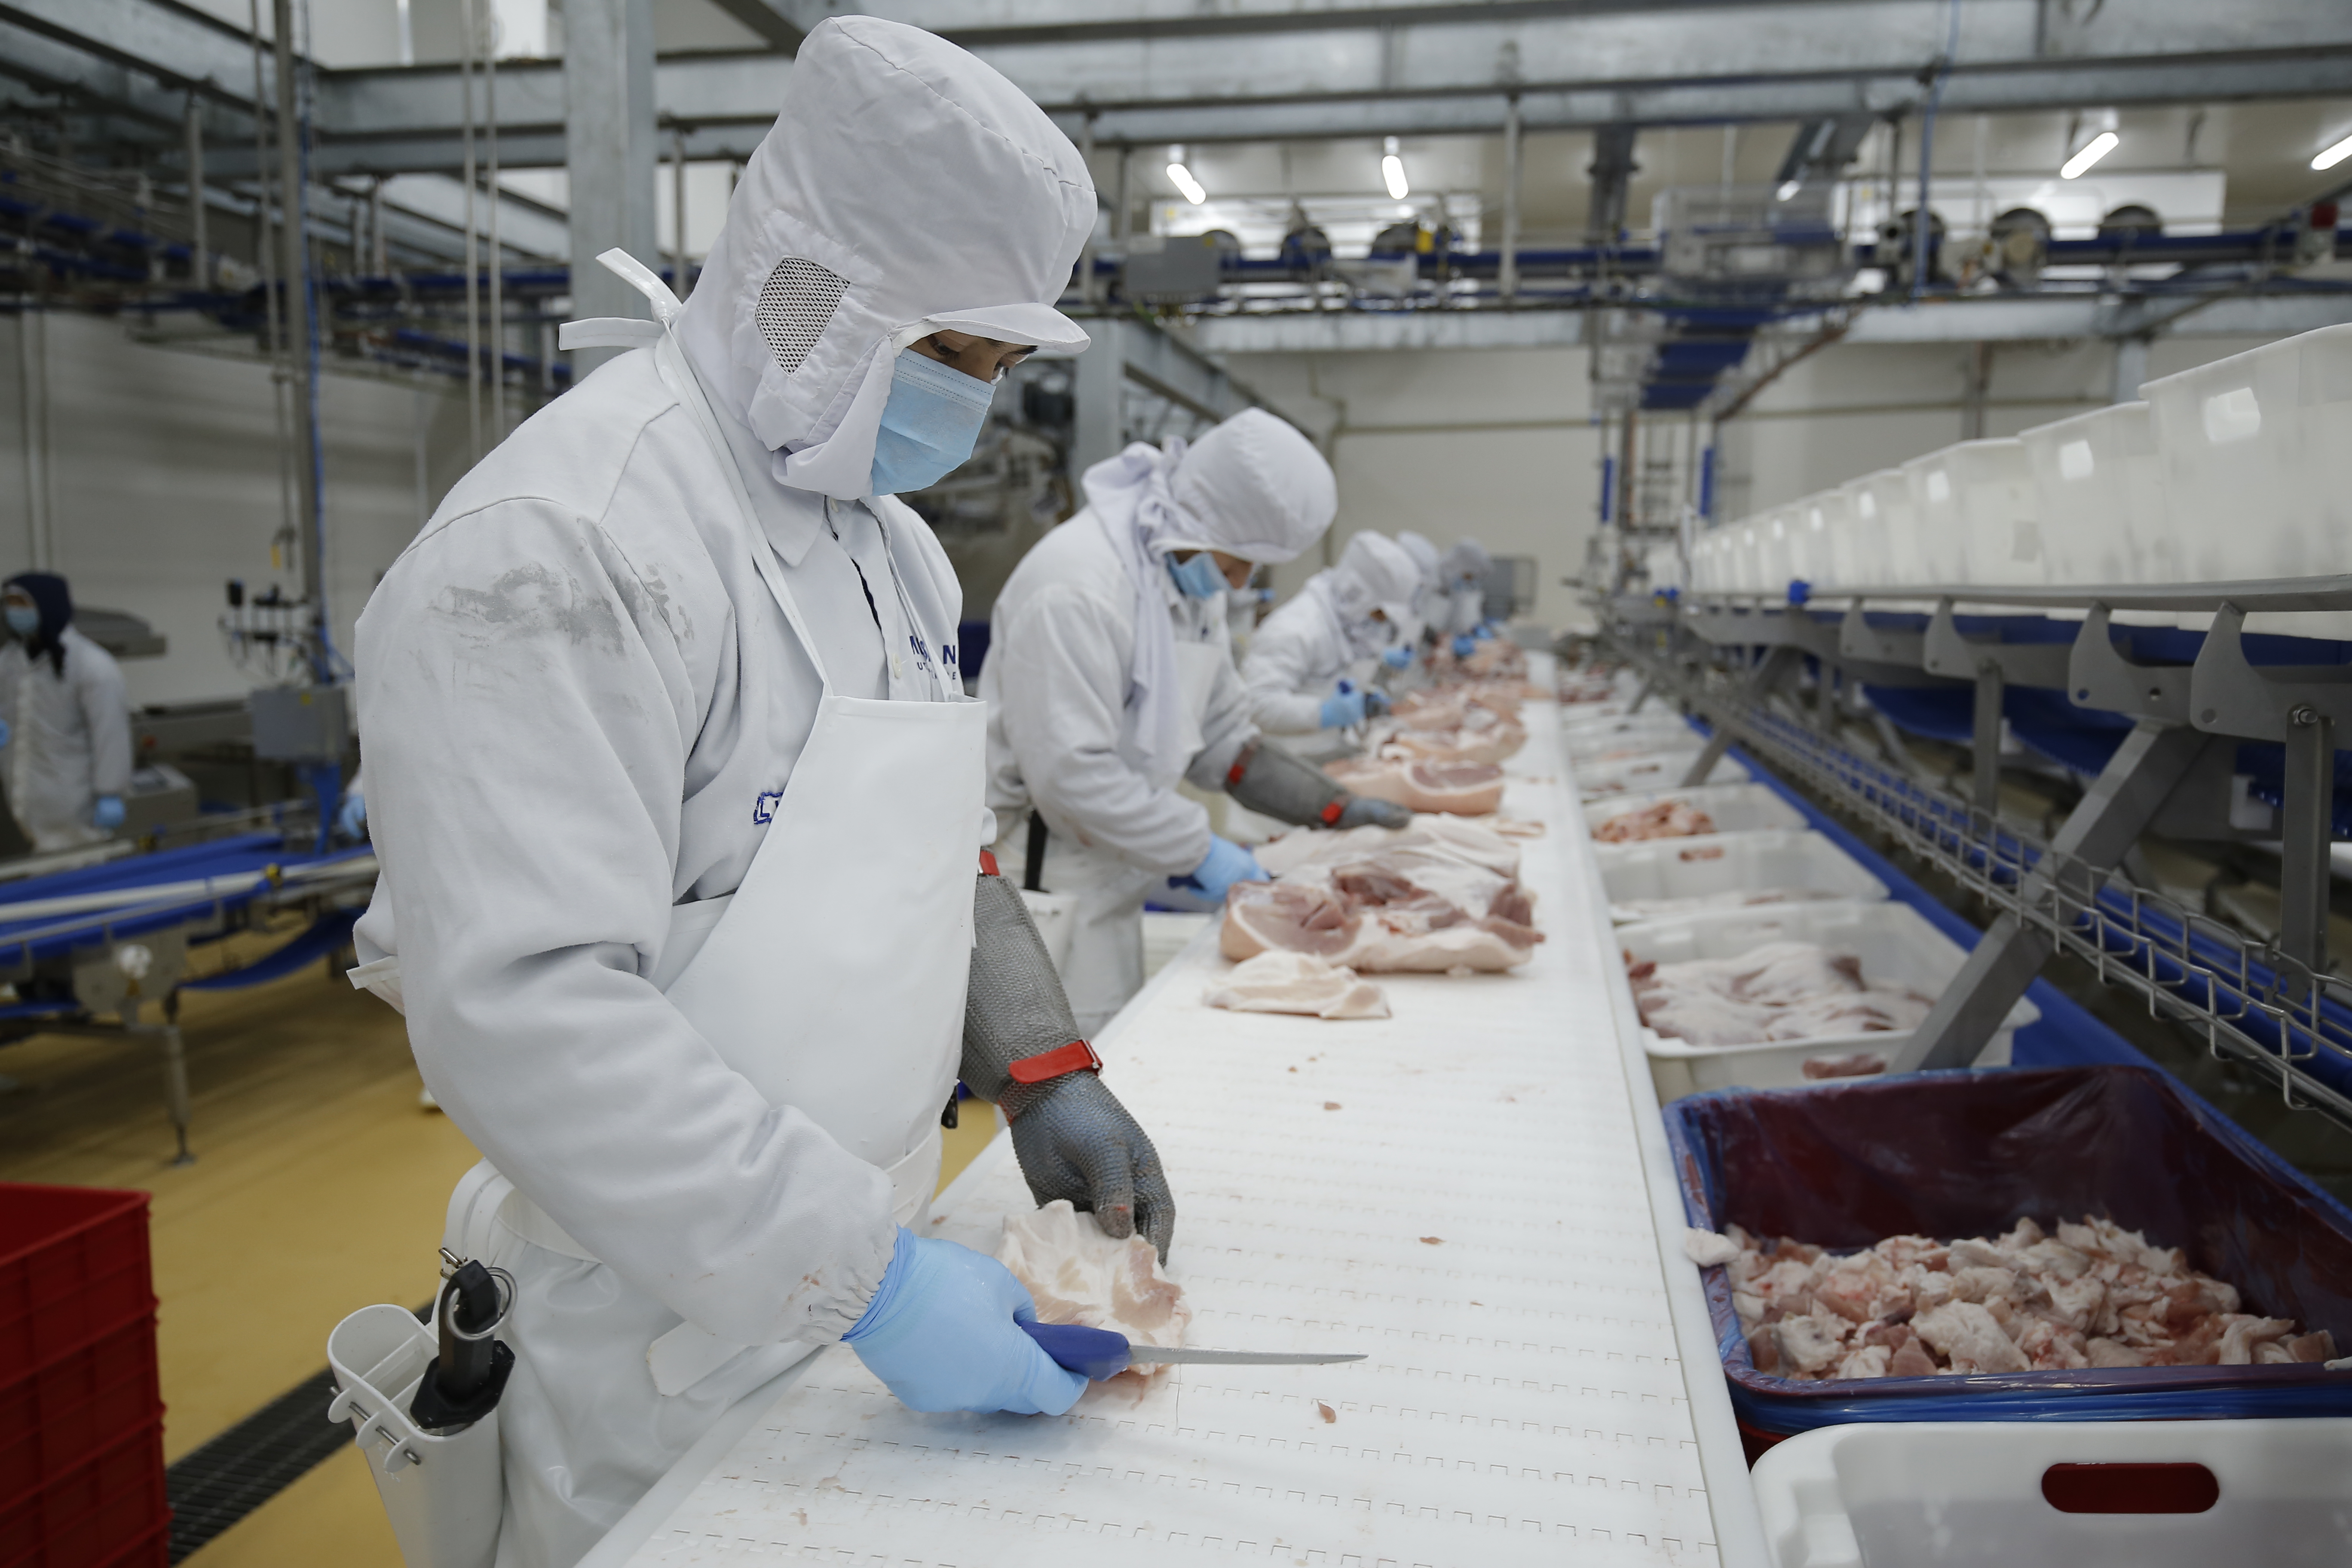 Masan MEATLife shares were successfully allocated to individual investors